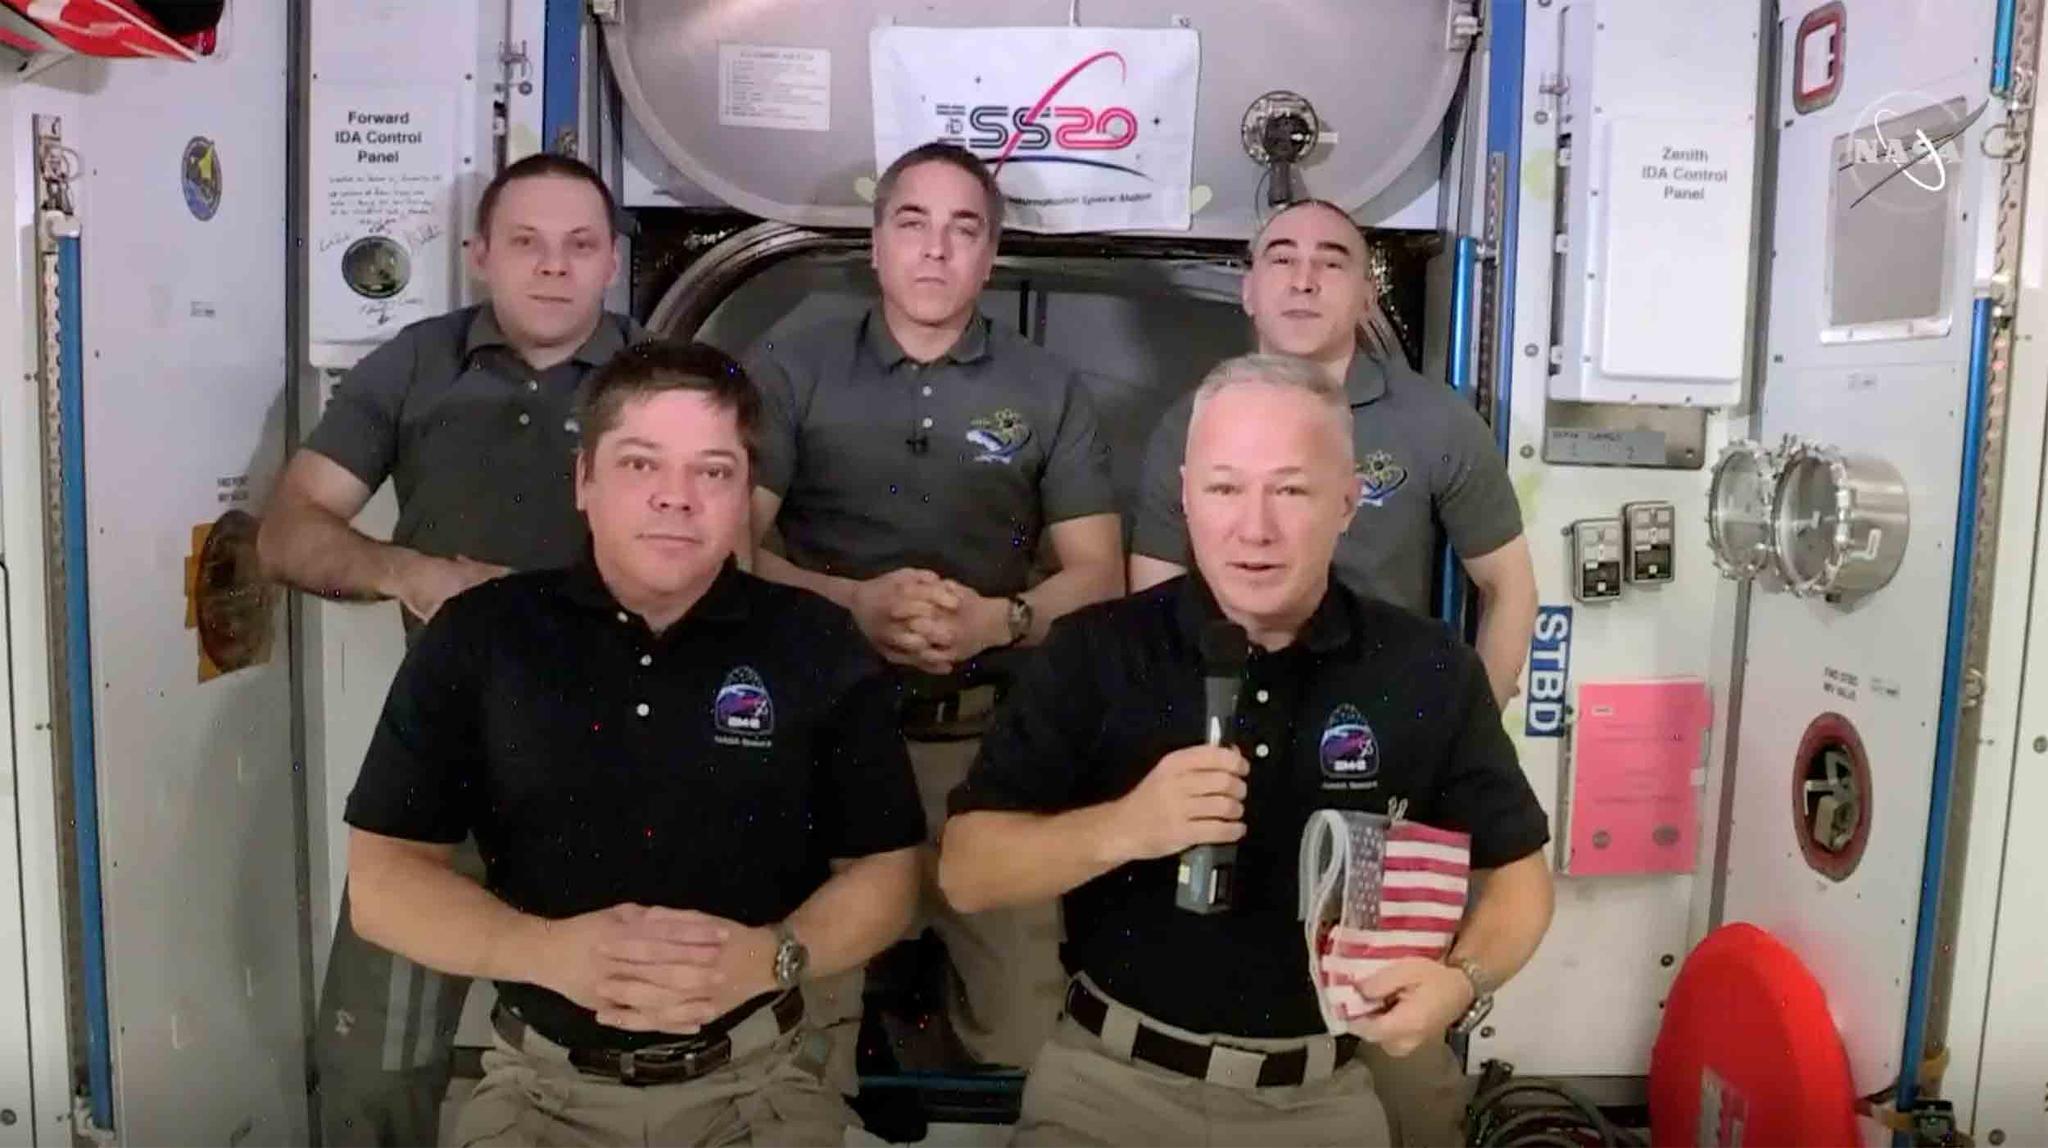 This photo provided by NASA shows, from left, front, astronauts Bob Behnken and Doug Hurley during an interview on the International Space Station on Saturday, Aug. 1, 2020.